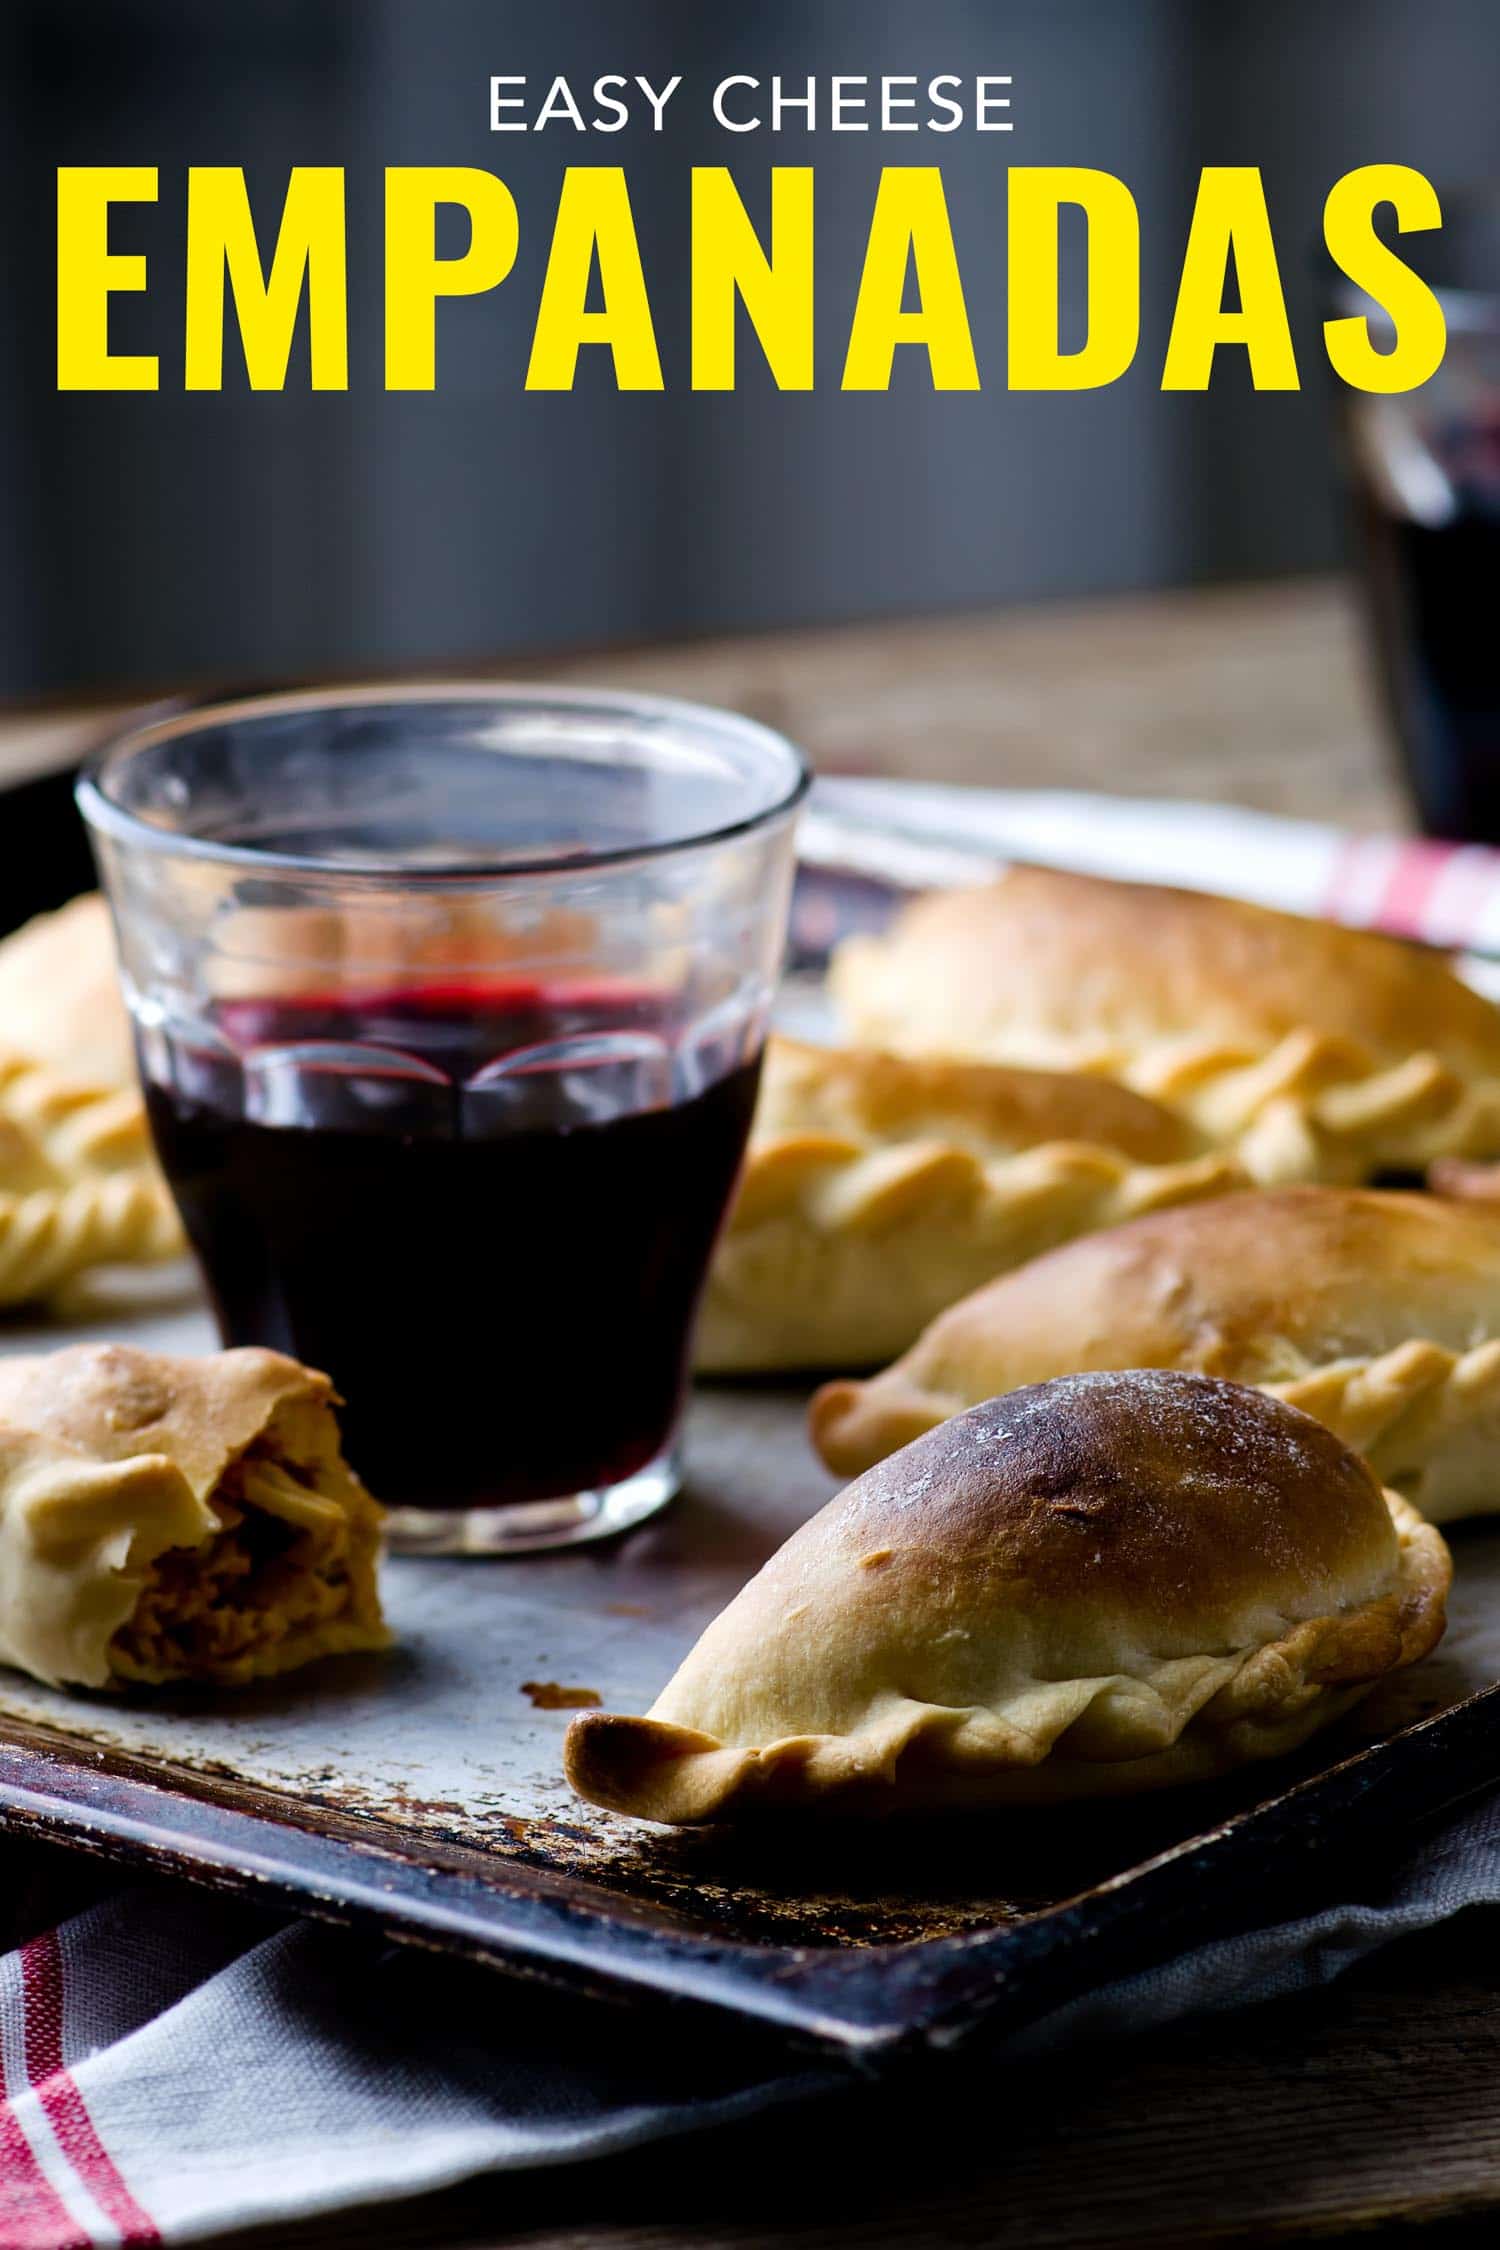 Cheese empanadas with red wine